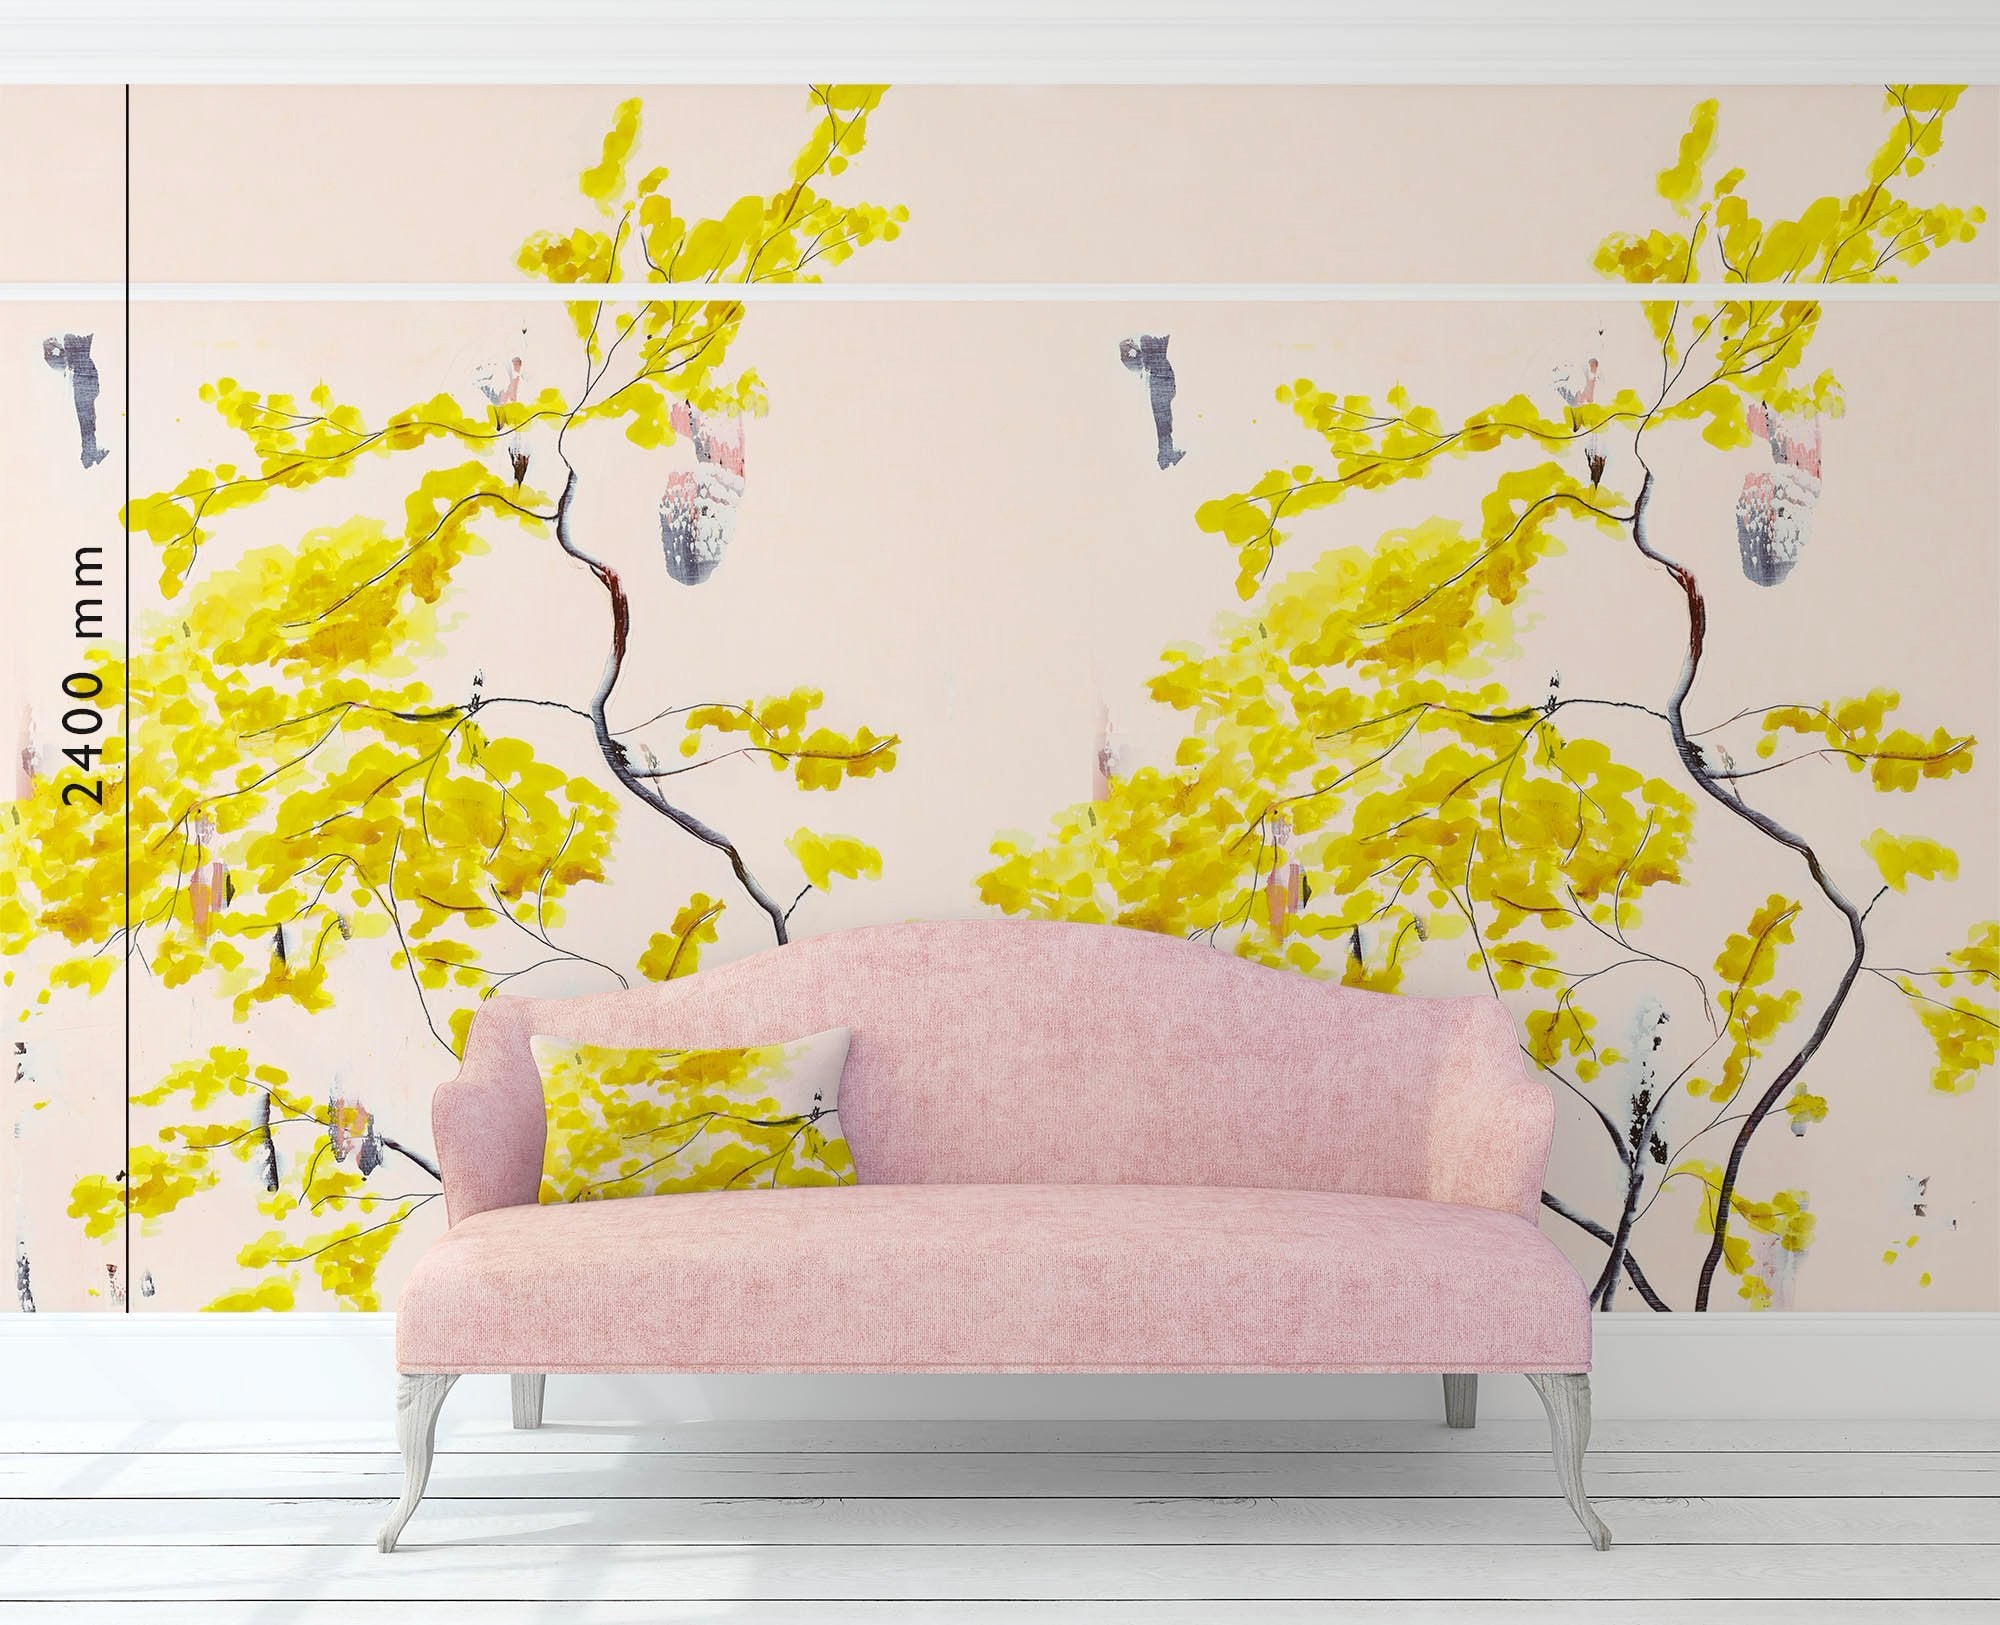 Chinese Tree in Blush mural wallpaper by Anna Jacobs - with picture rail and pink sofa